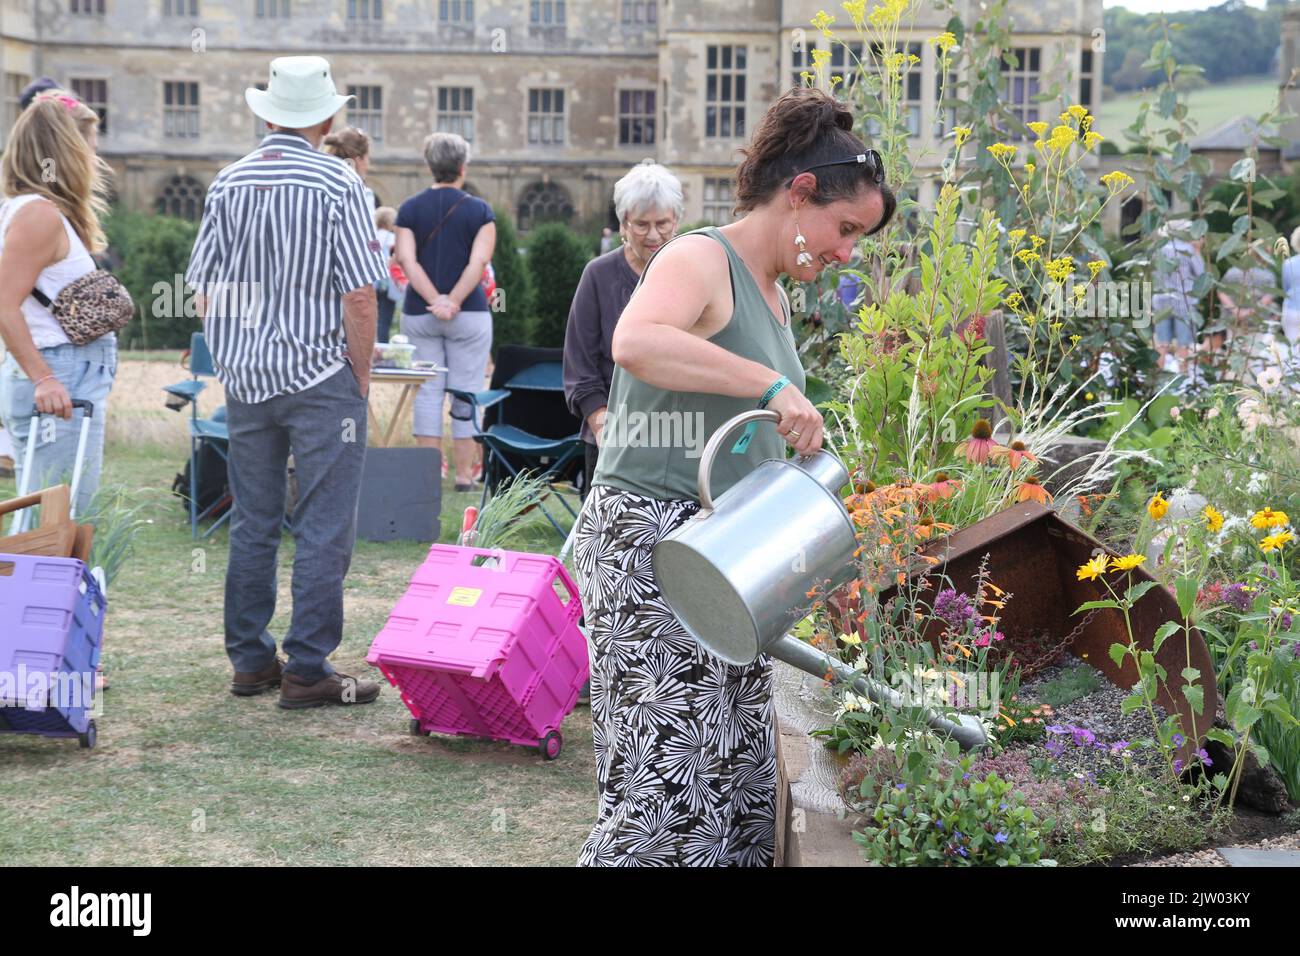 The first ever BBC Gardeners' World Autumn Fair is taking place at Audley End House in Essex. Shona Lockheart watering her small space garden 'We're all Cuckoo here.' Stock Photo